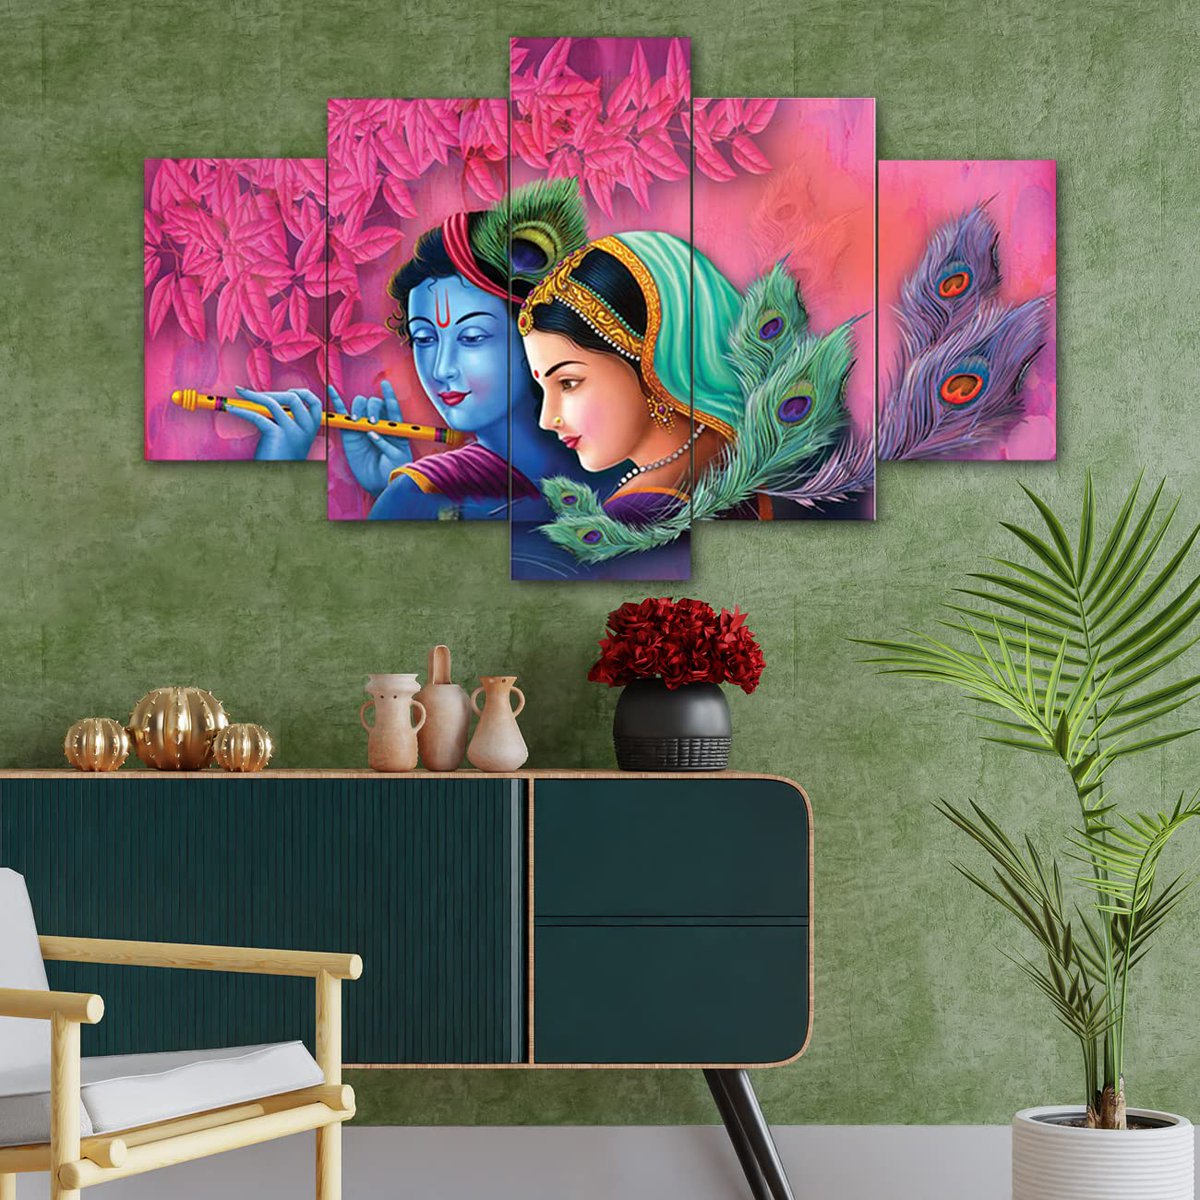 Paintings are often considered as a form of artistic expression and have been practiced for centuries by artists around the world.

SHOP NOW
Follow us @blessberries.india
Visit blessberries.com for more products.

#painting #india #fatalframes #instaframe #frame #frames